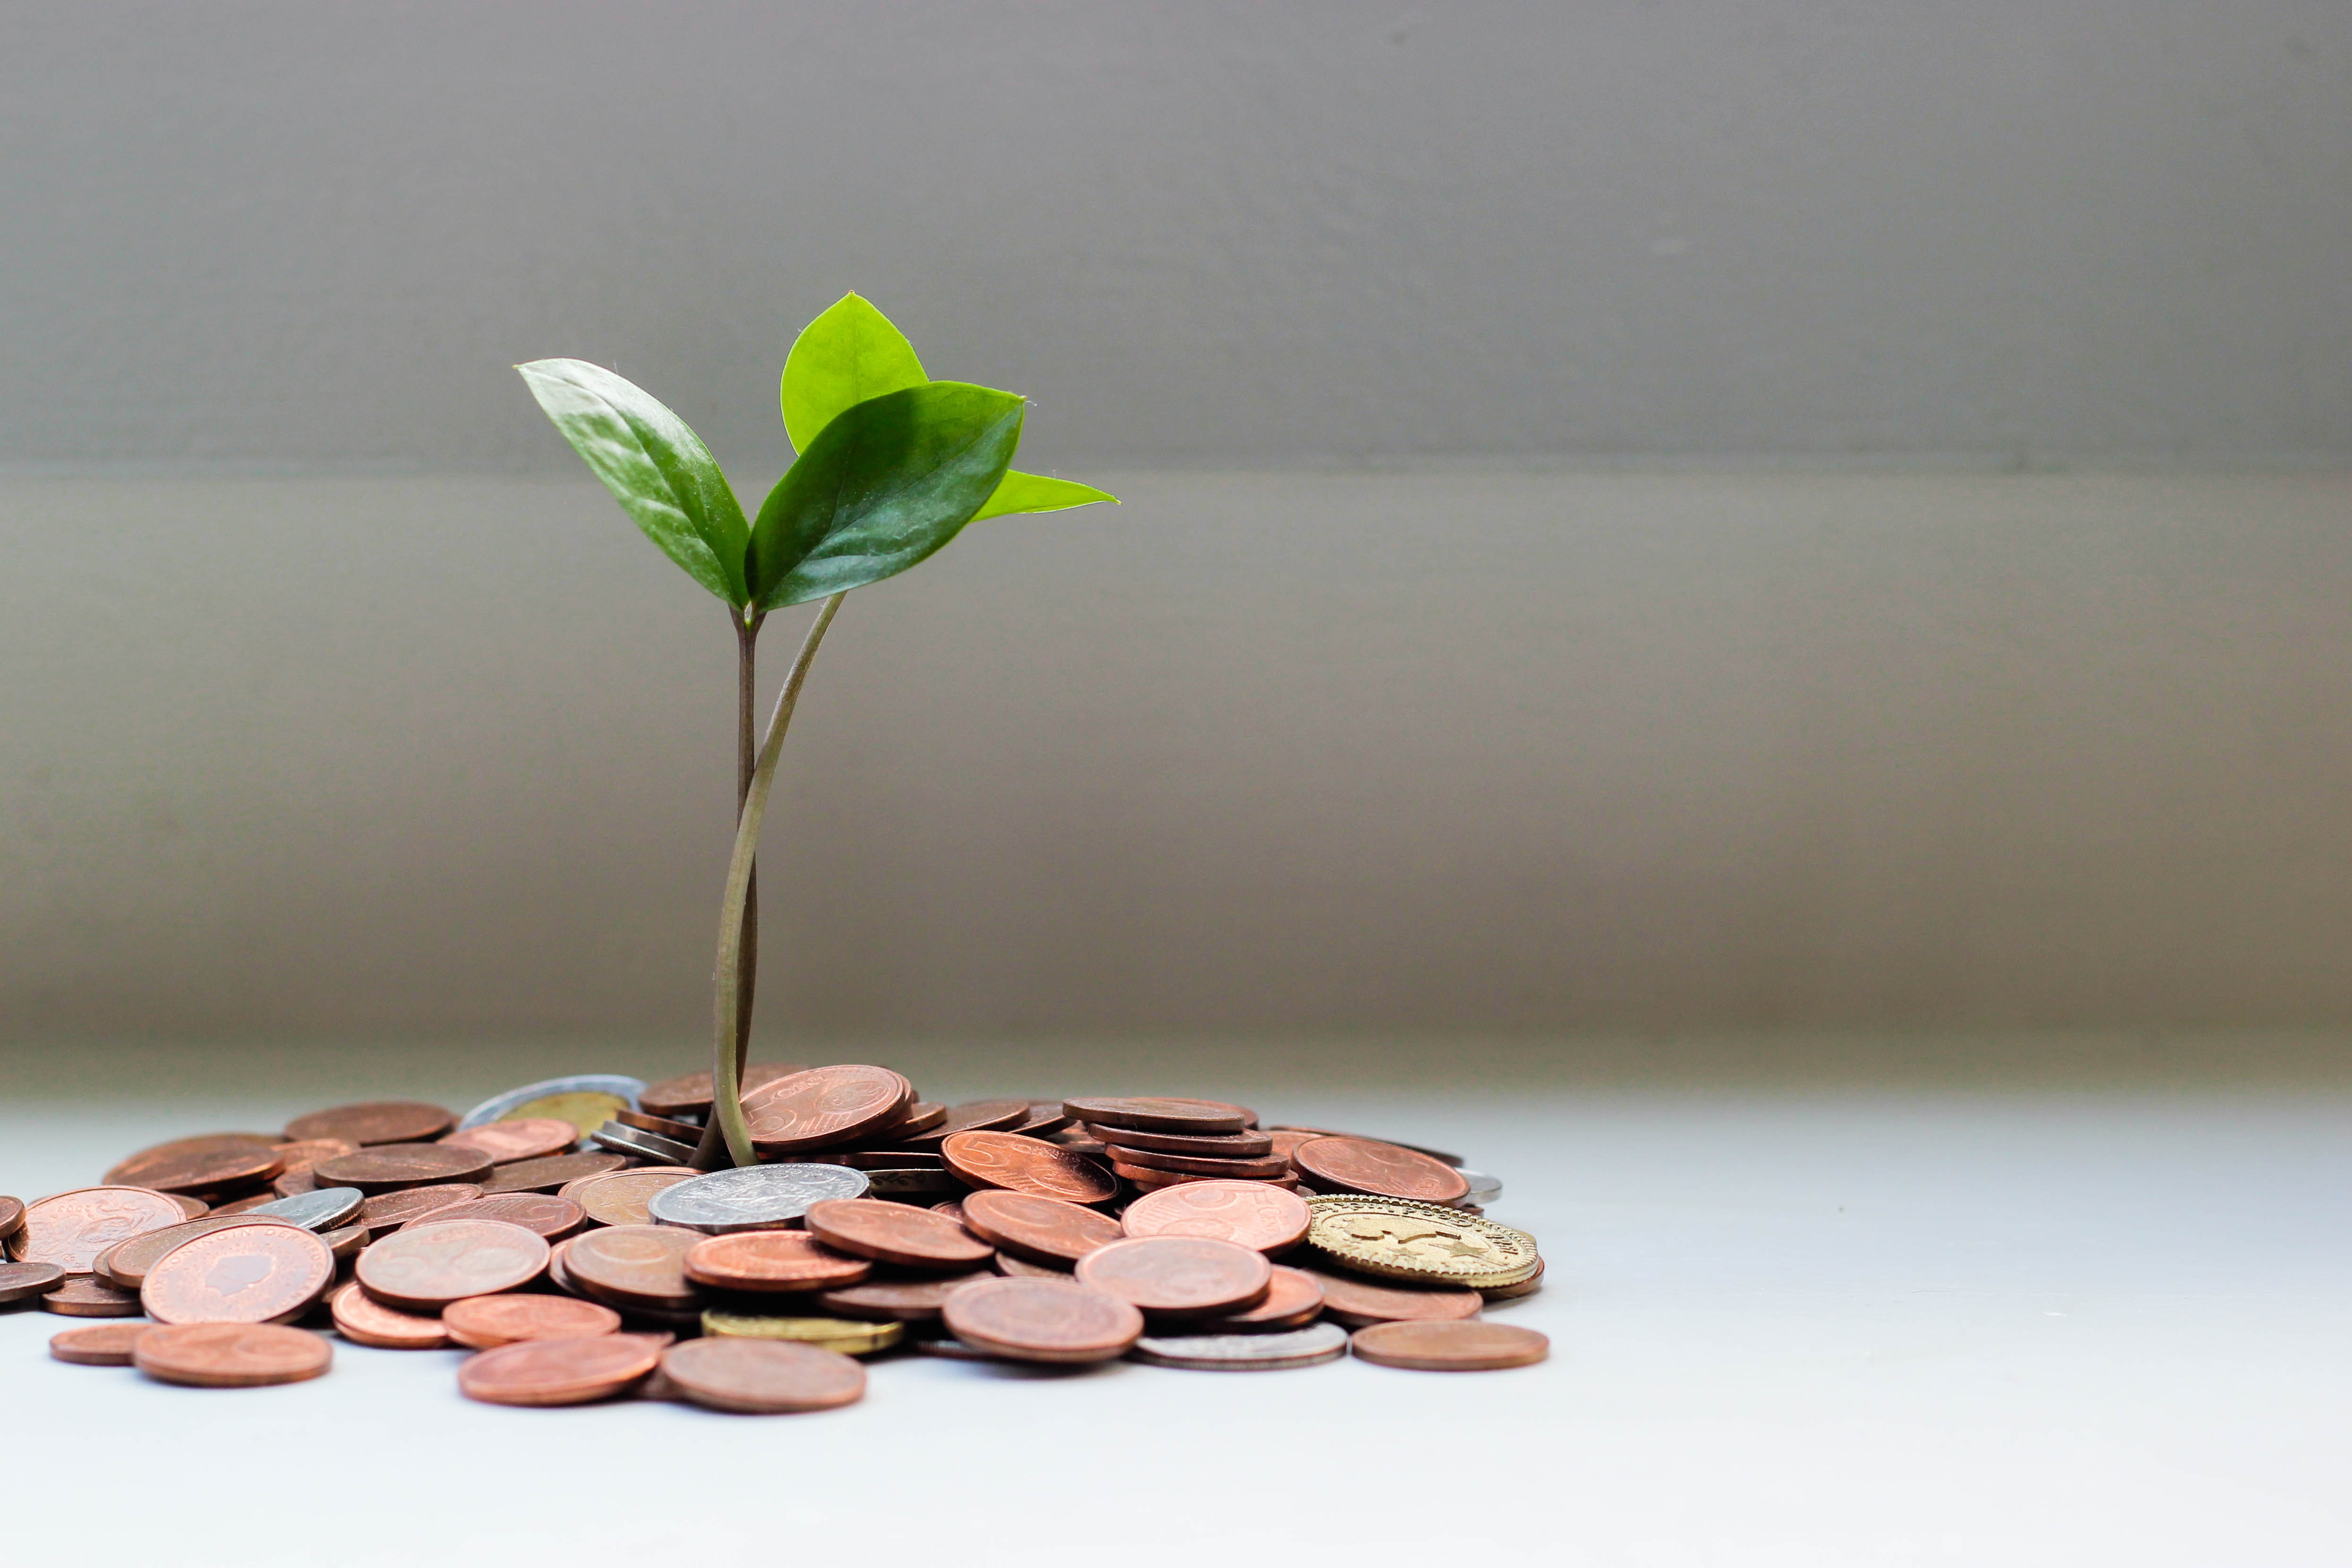 The image depicts a small, green sprout emerging from a stack of shiny coins.